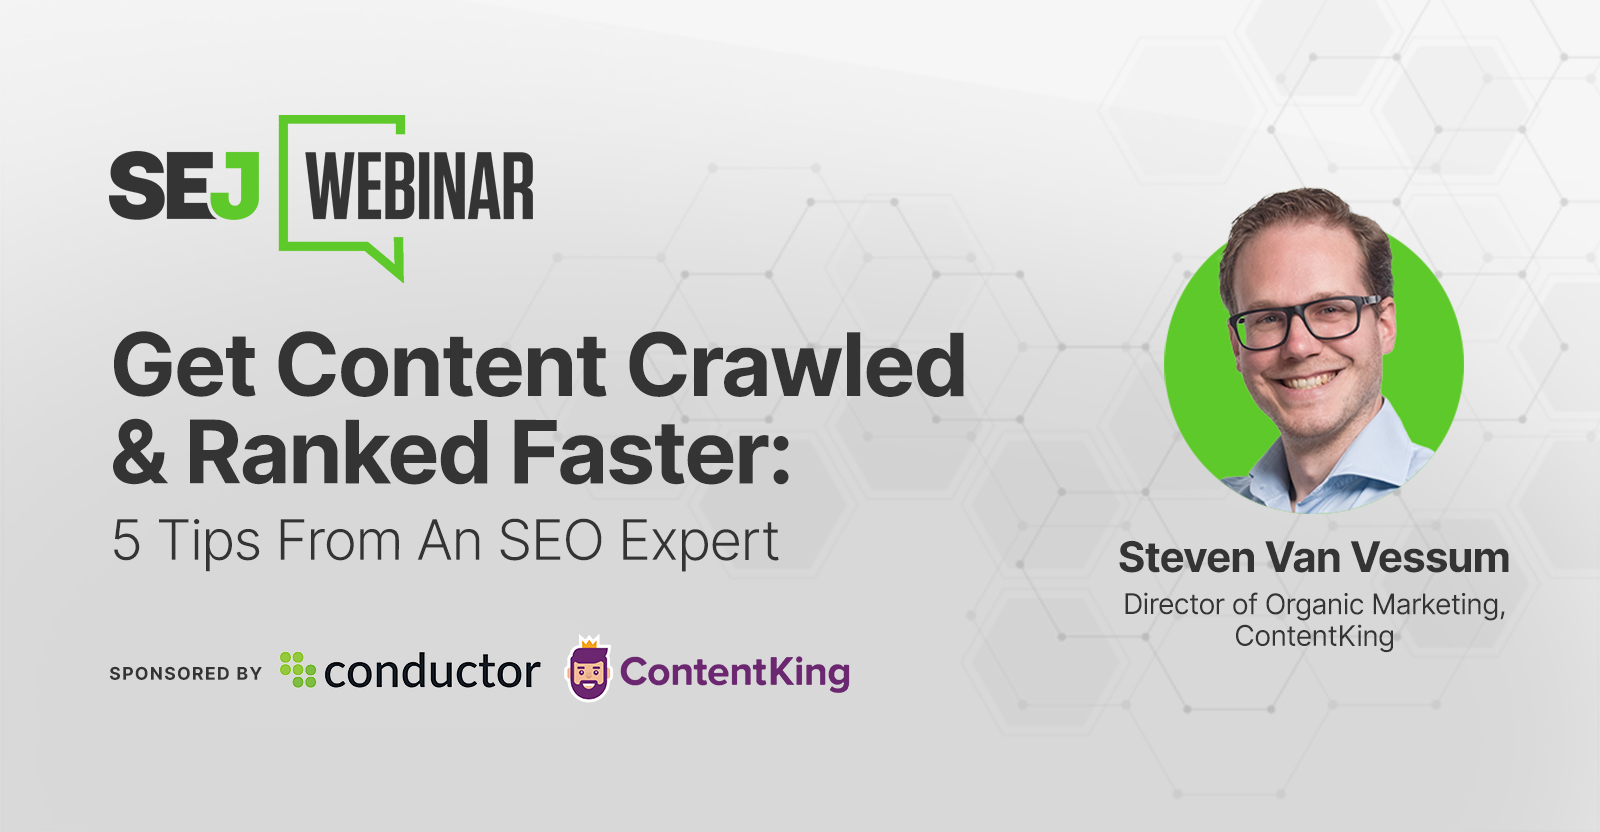 Get Content Crawled & Ranked Faster: 5 Tips From An SEO Expert via @sejournal, @hethr_campbell